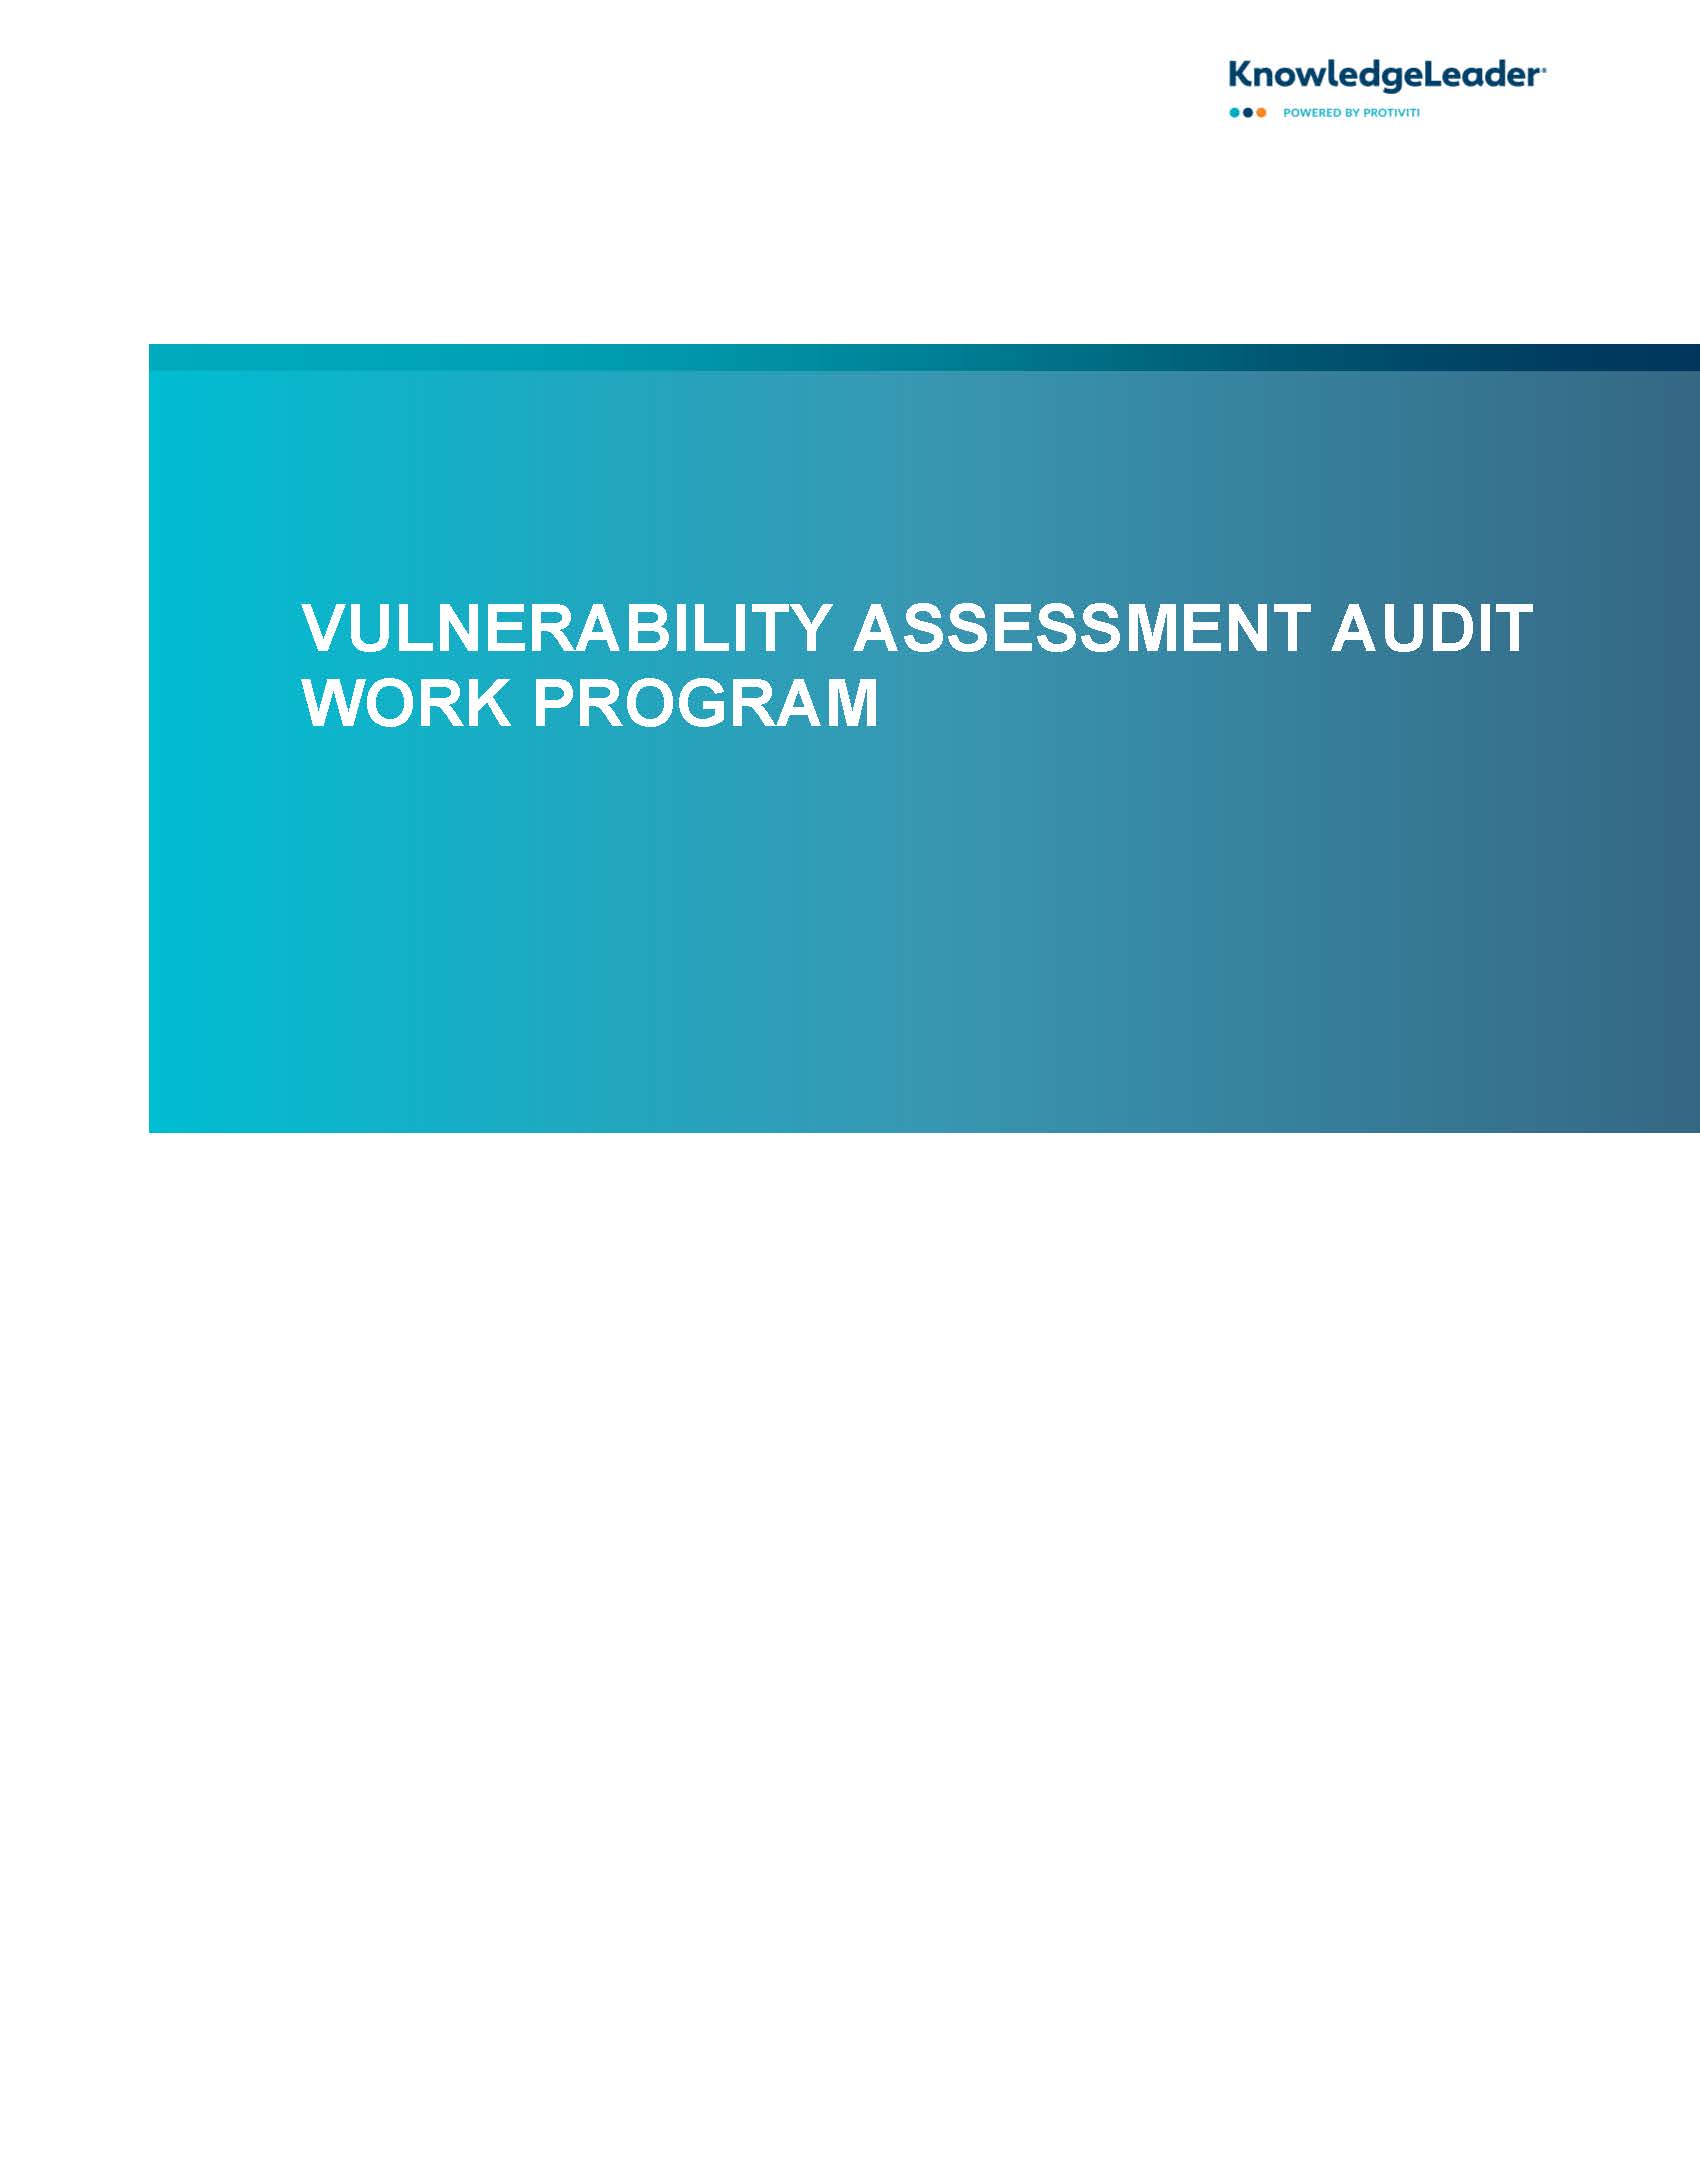 Screenshot of the first page of Vulnerability Assessment Audit Work Program